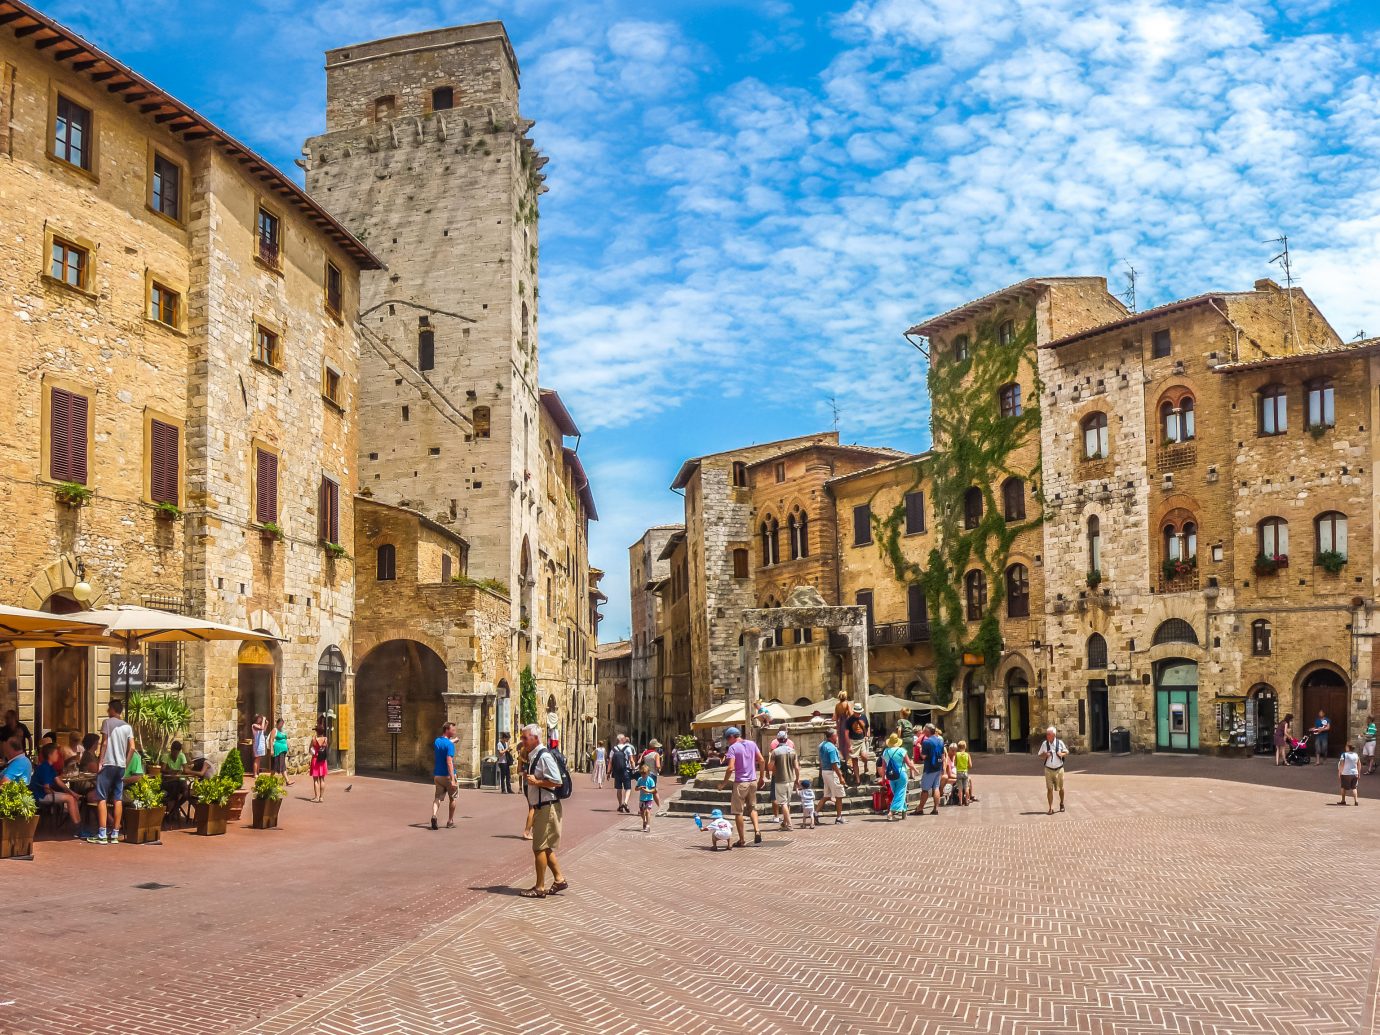 Italy Trip Ideas Town sky City town square landmark plaza urban area neighbourhood street tourism history medieval architecture Downtown building tourist attraction metropolis historic site facade ancient rome palace